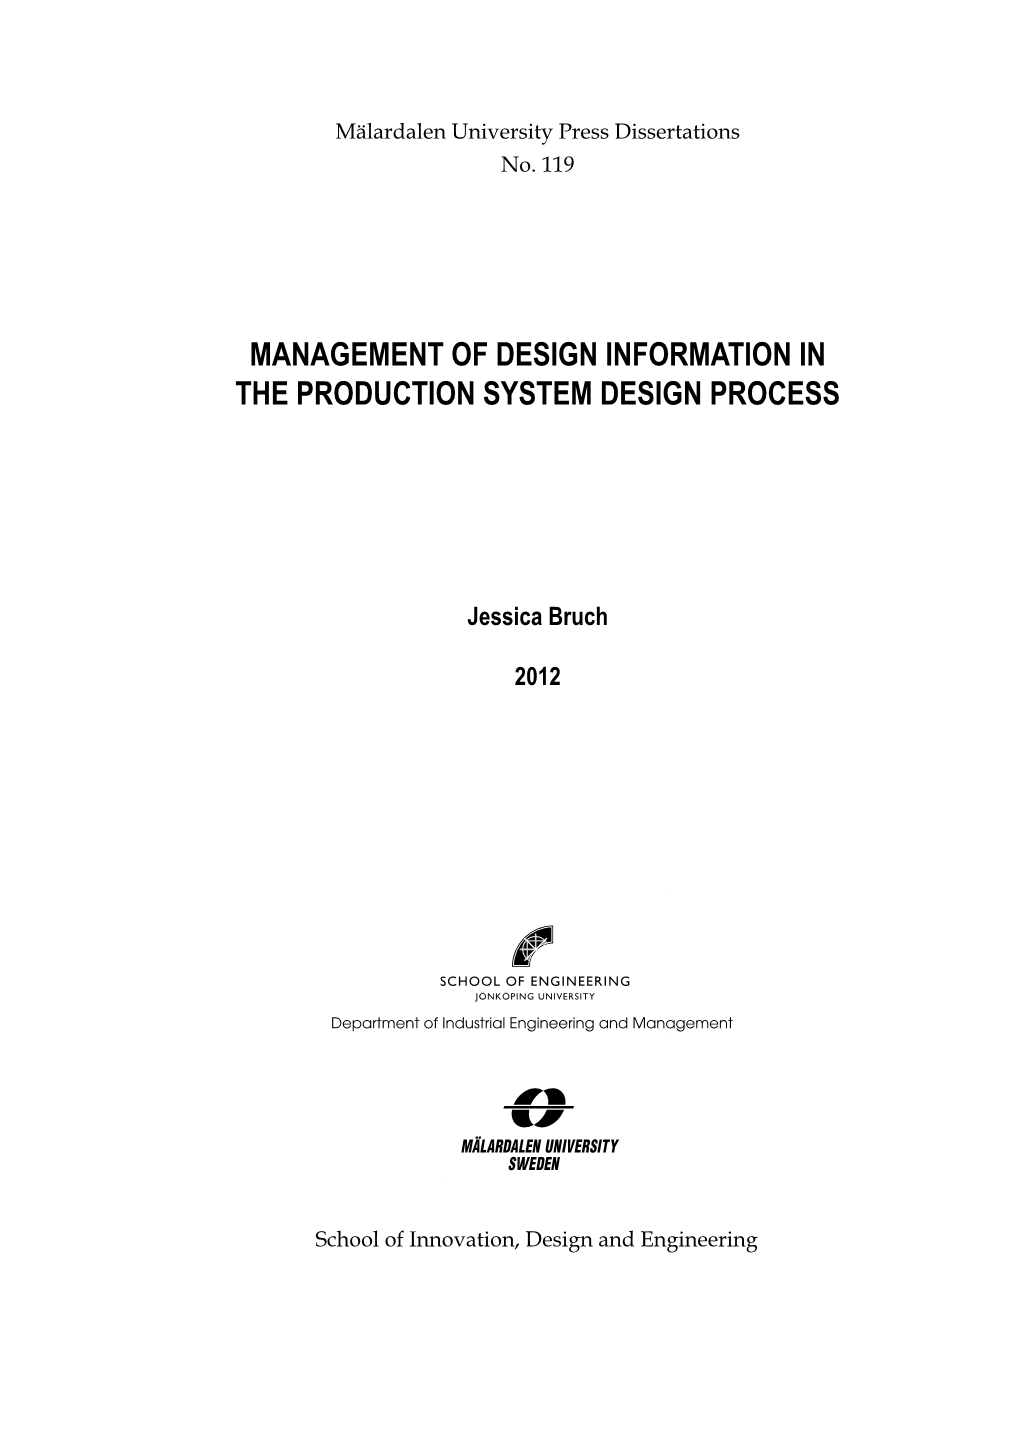 Management of Design Information in the Production System Design Process